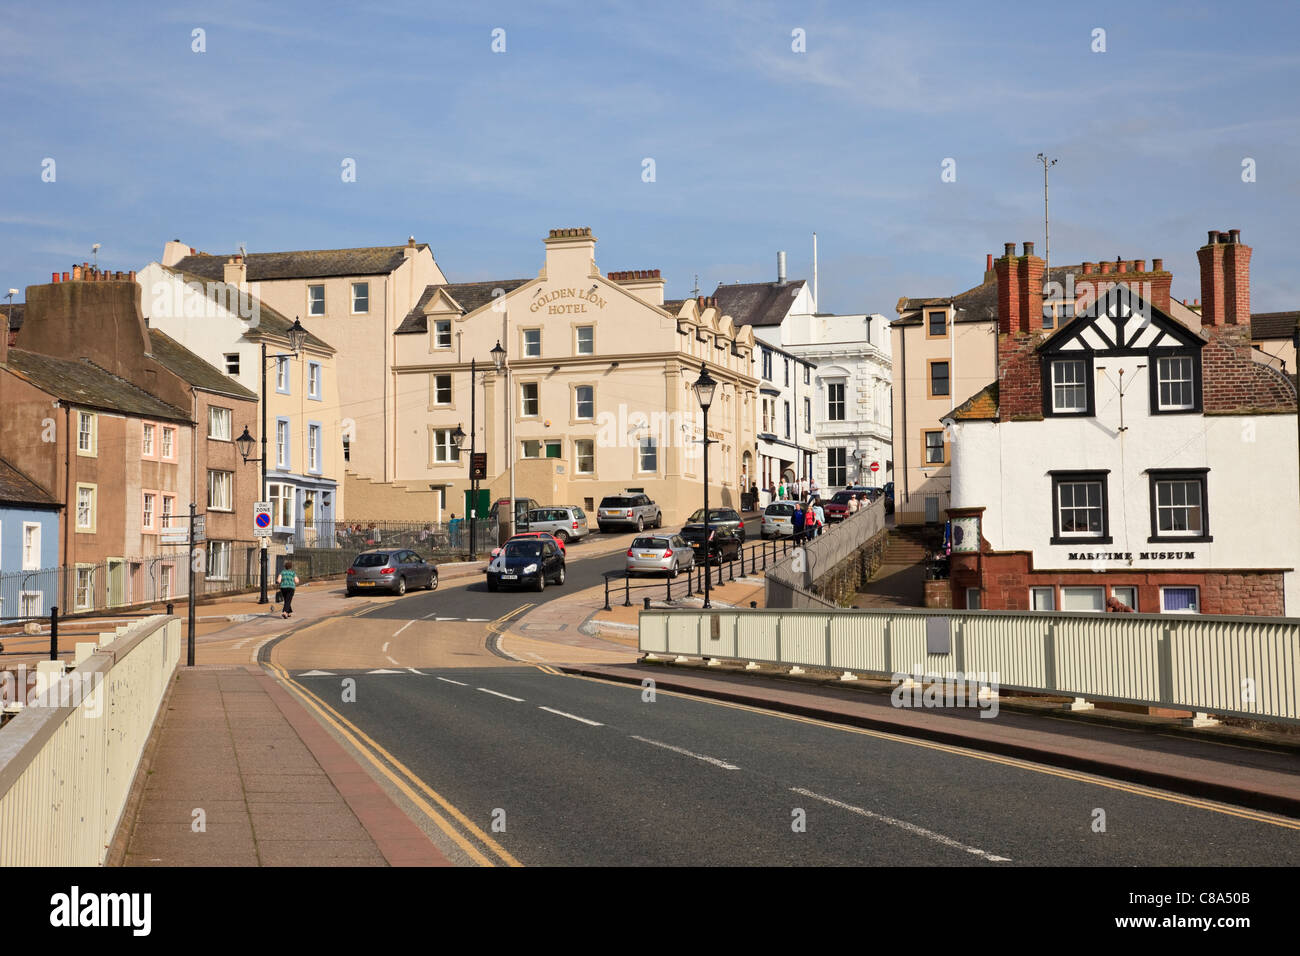 View along town main street from the bridge with Maritime Museum and Golden Lion Hotel. Maryport, Cumbria, England, UK, Britain. Stock Photo